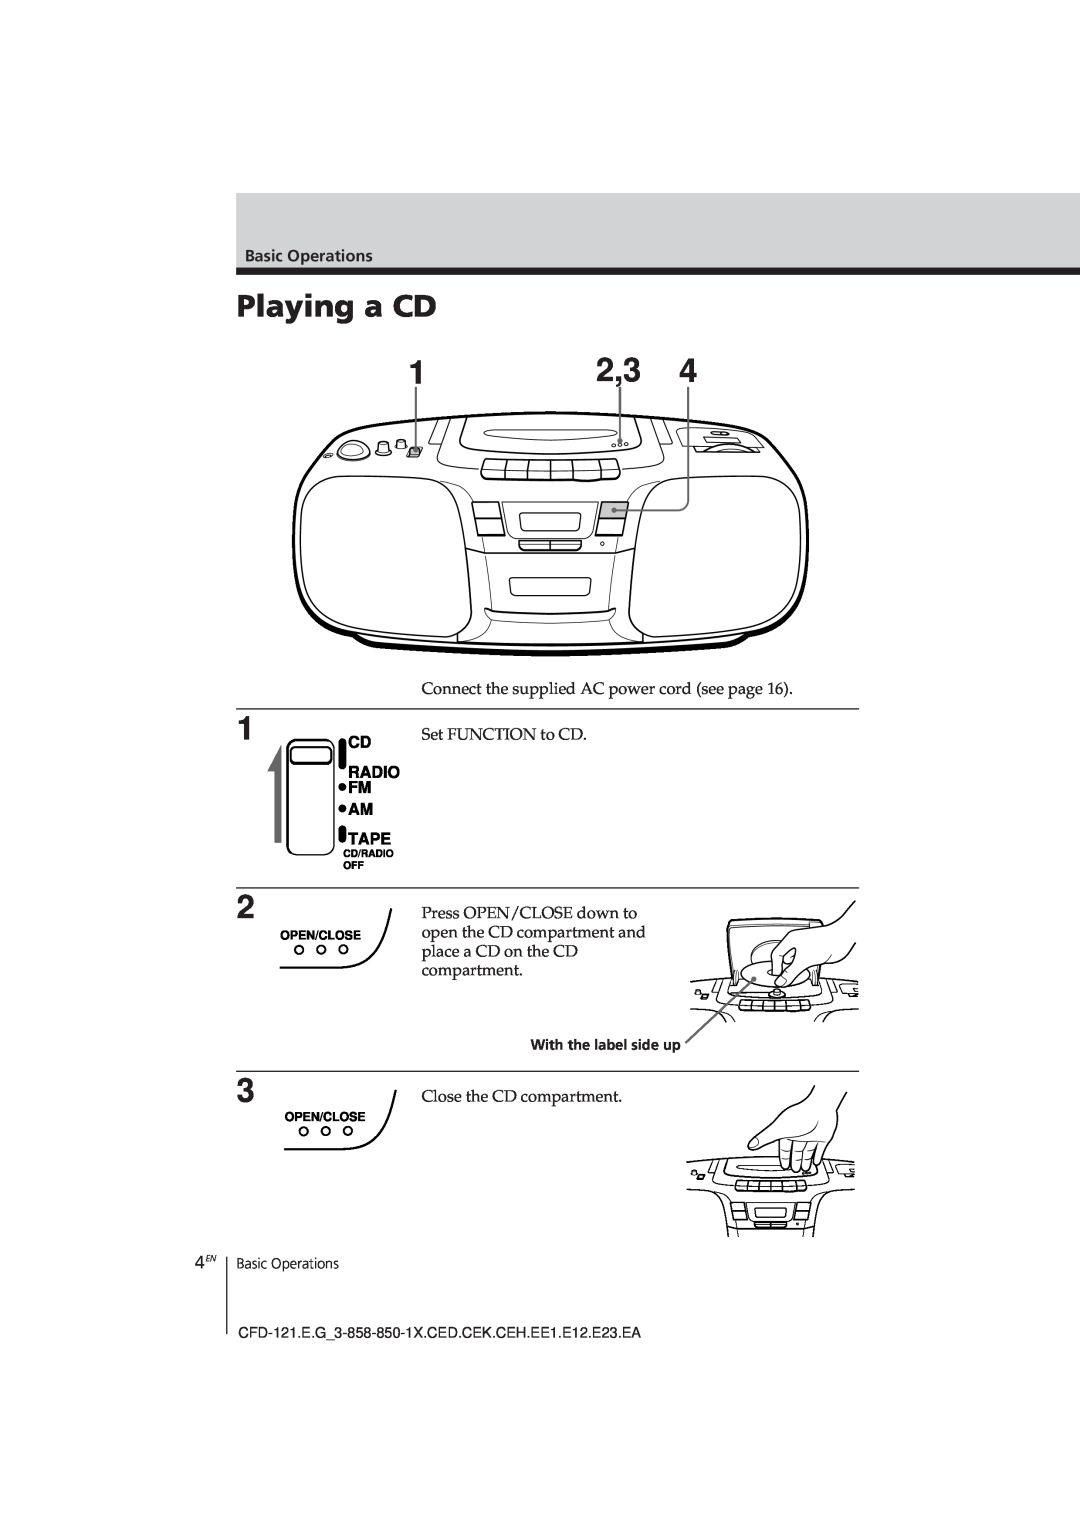 Sony CFD-121 operating instructions Playing a CD, Basic Operations, Close the CD compartment, With the label side up 